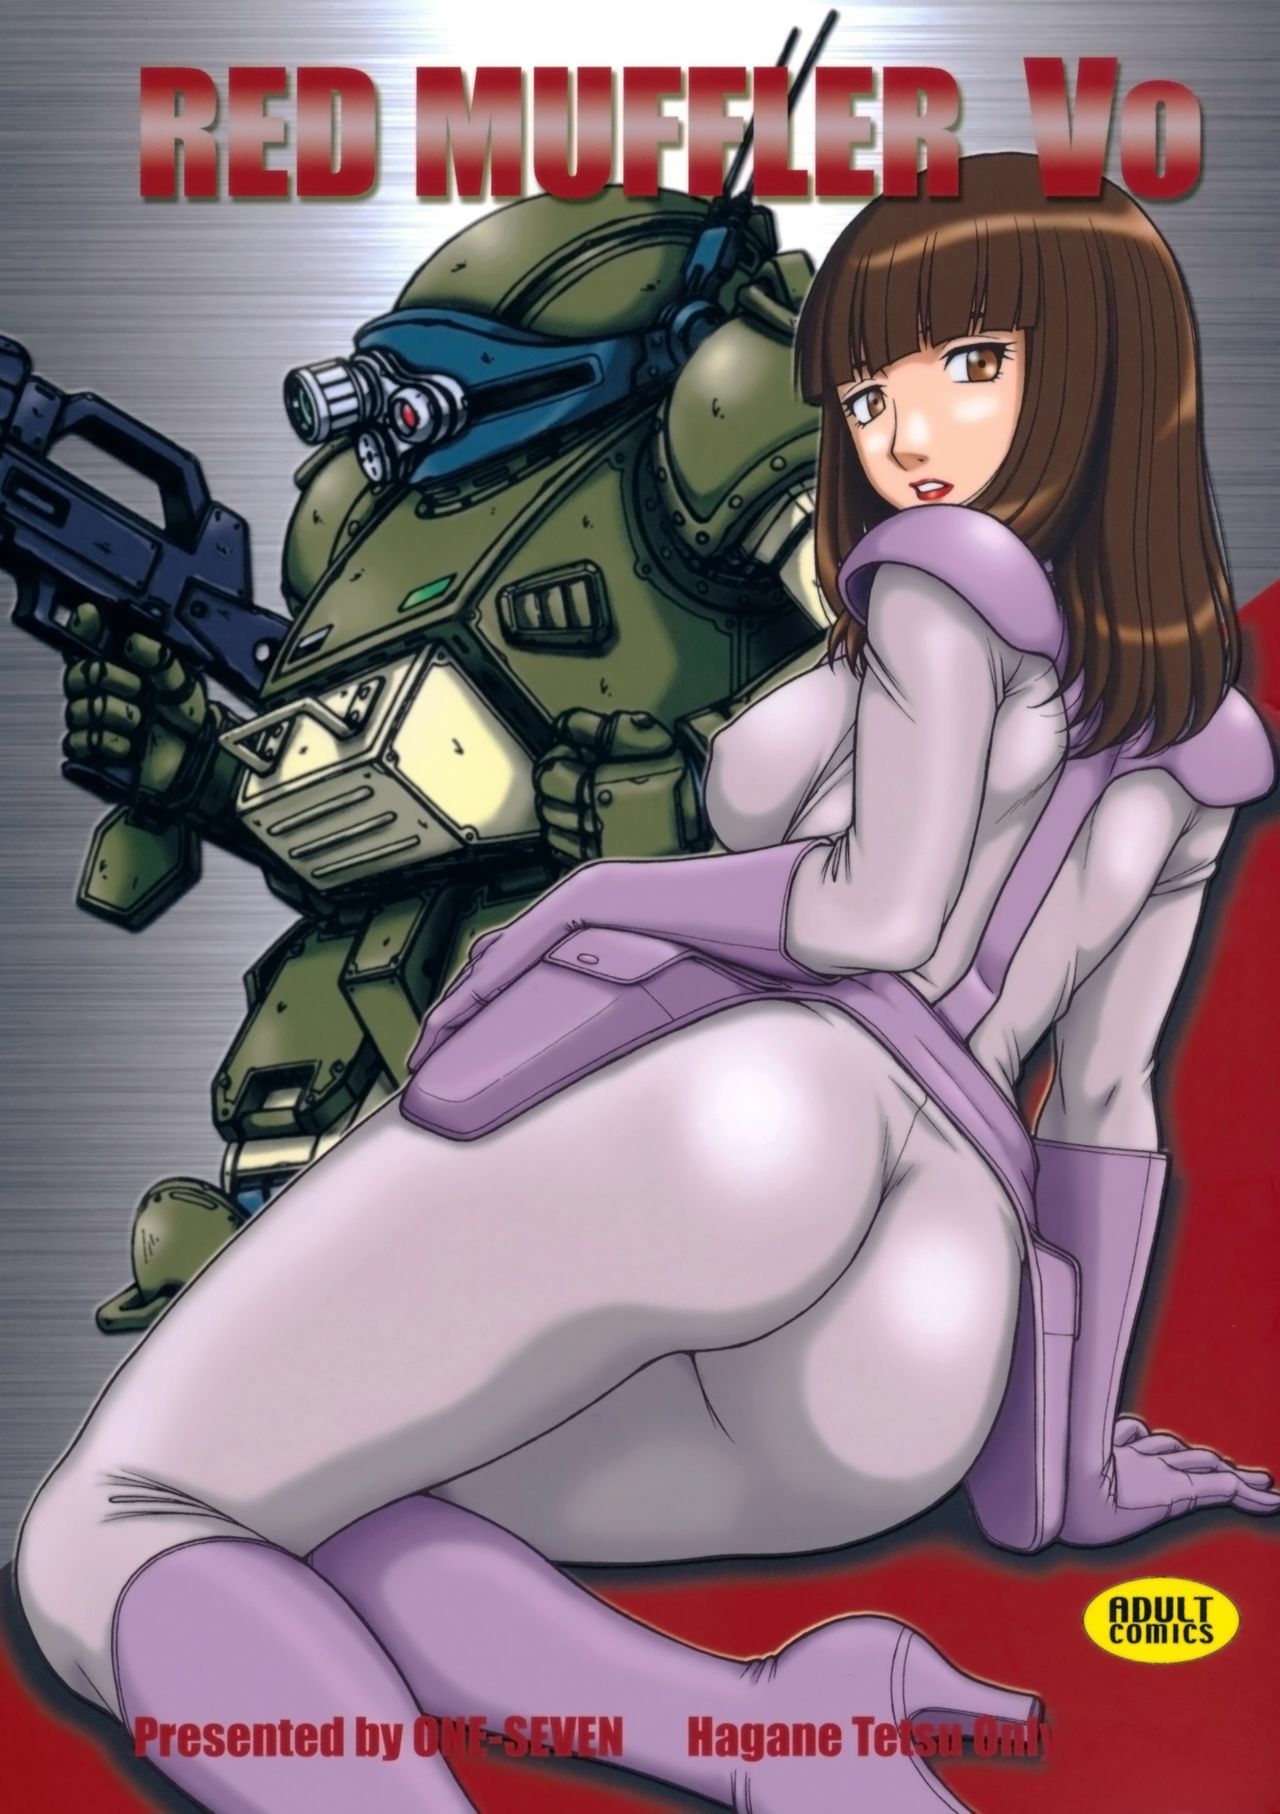 (C78) [ONE-SEVEN (Hagane Tetsu)] RED MUFFLER Vo (Armored Trooper Votoms) page 1 full